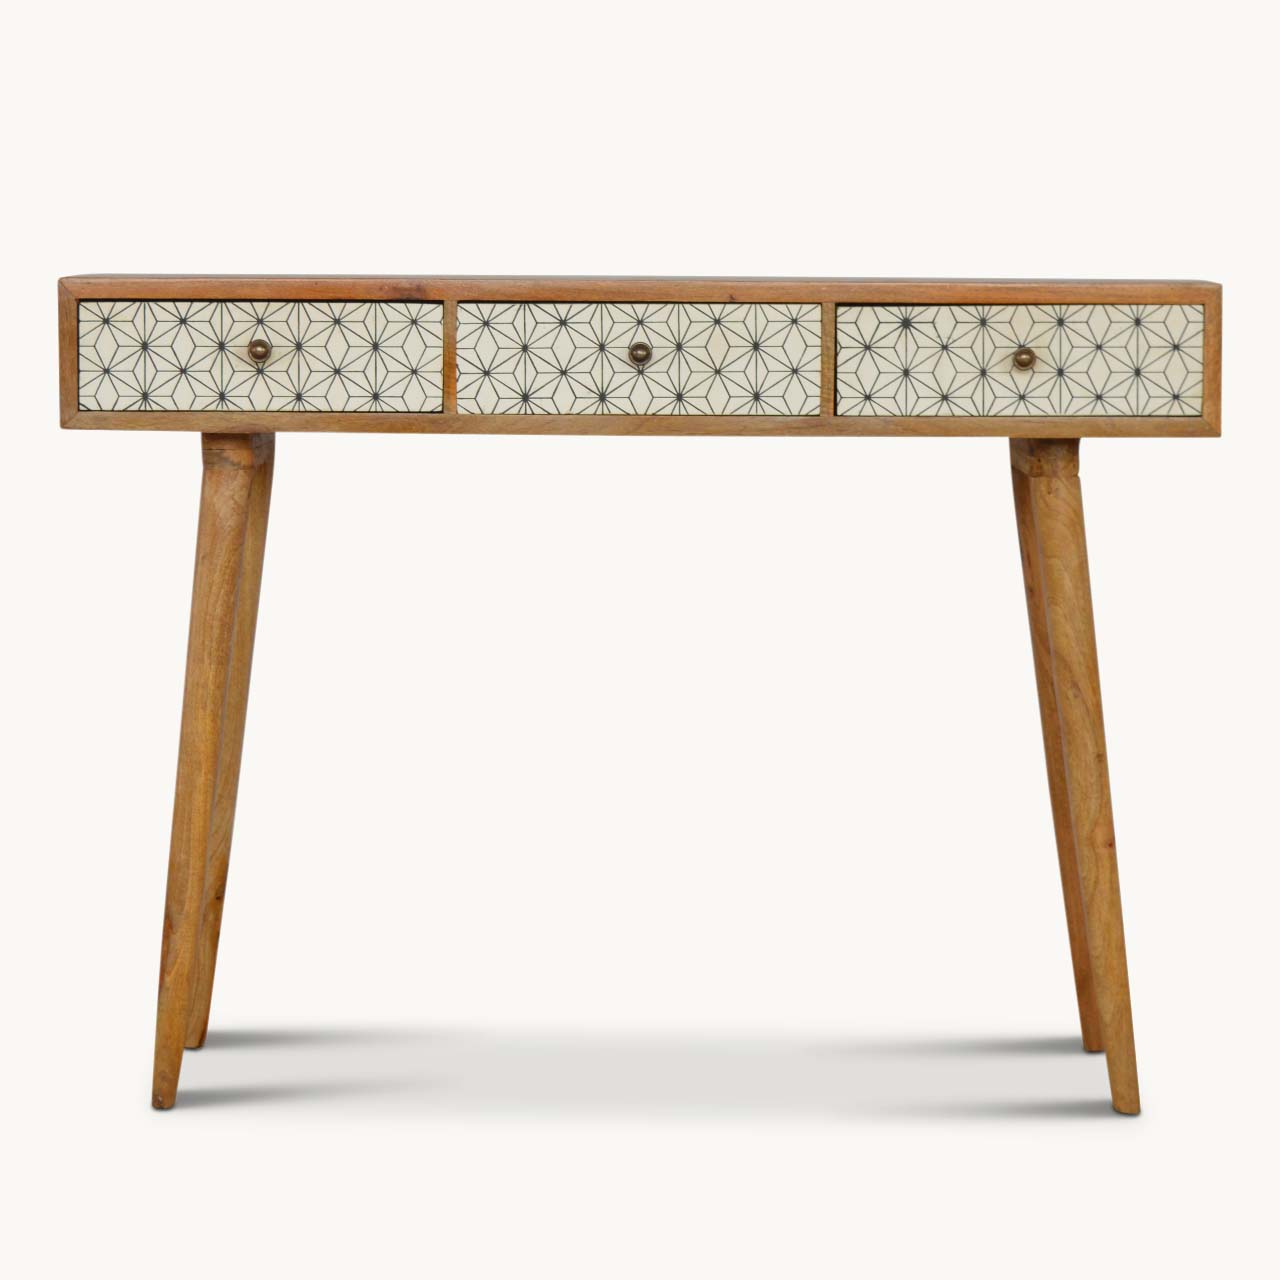 3 drawer Wooden console table with geometric pattern